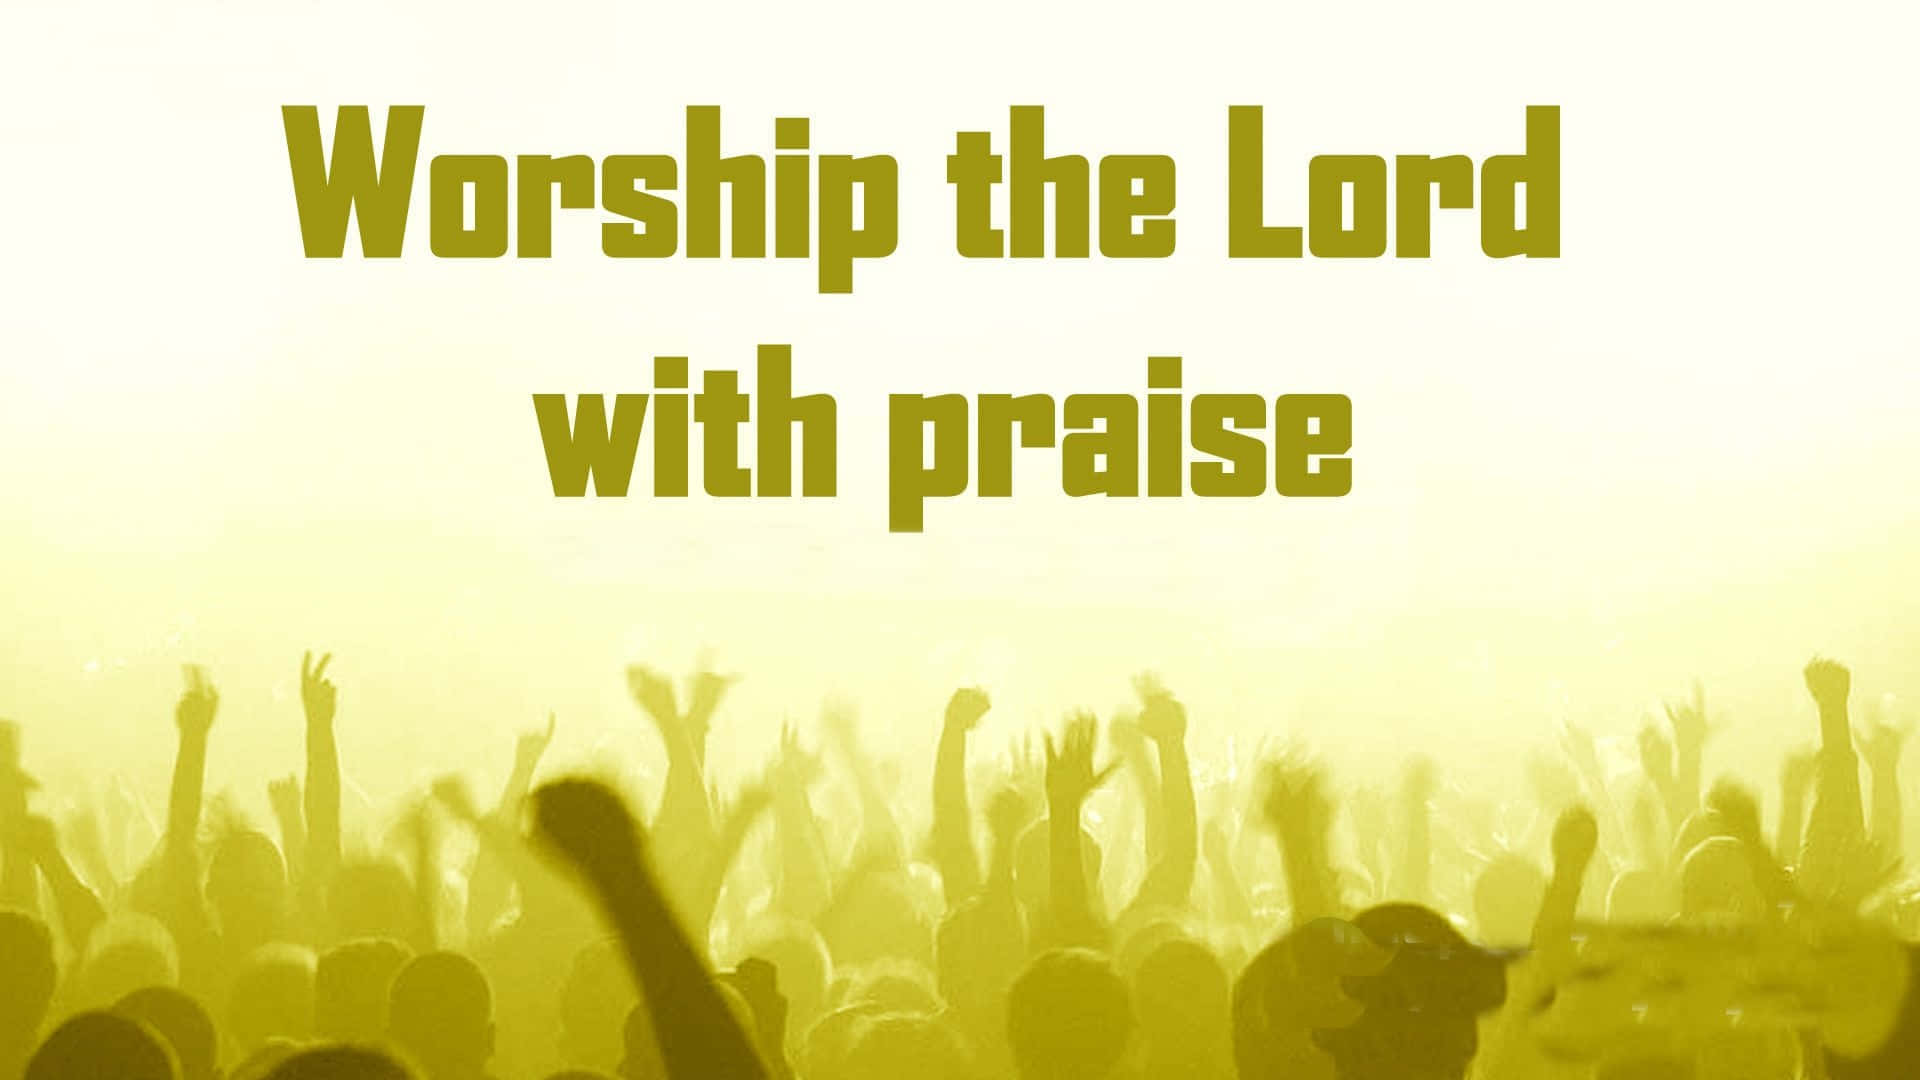 Praise God with the power of worship!